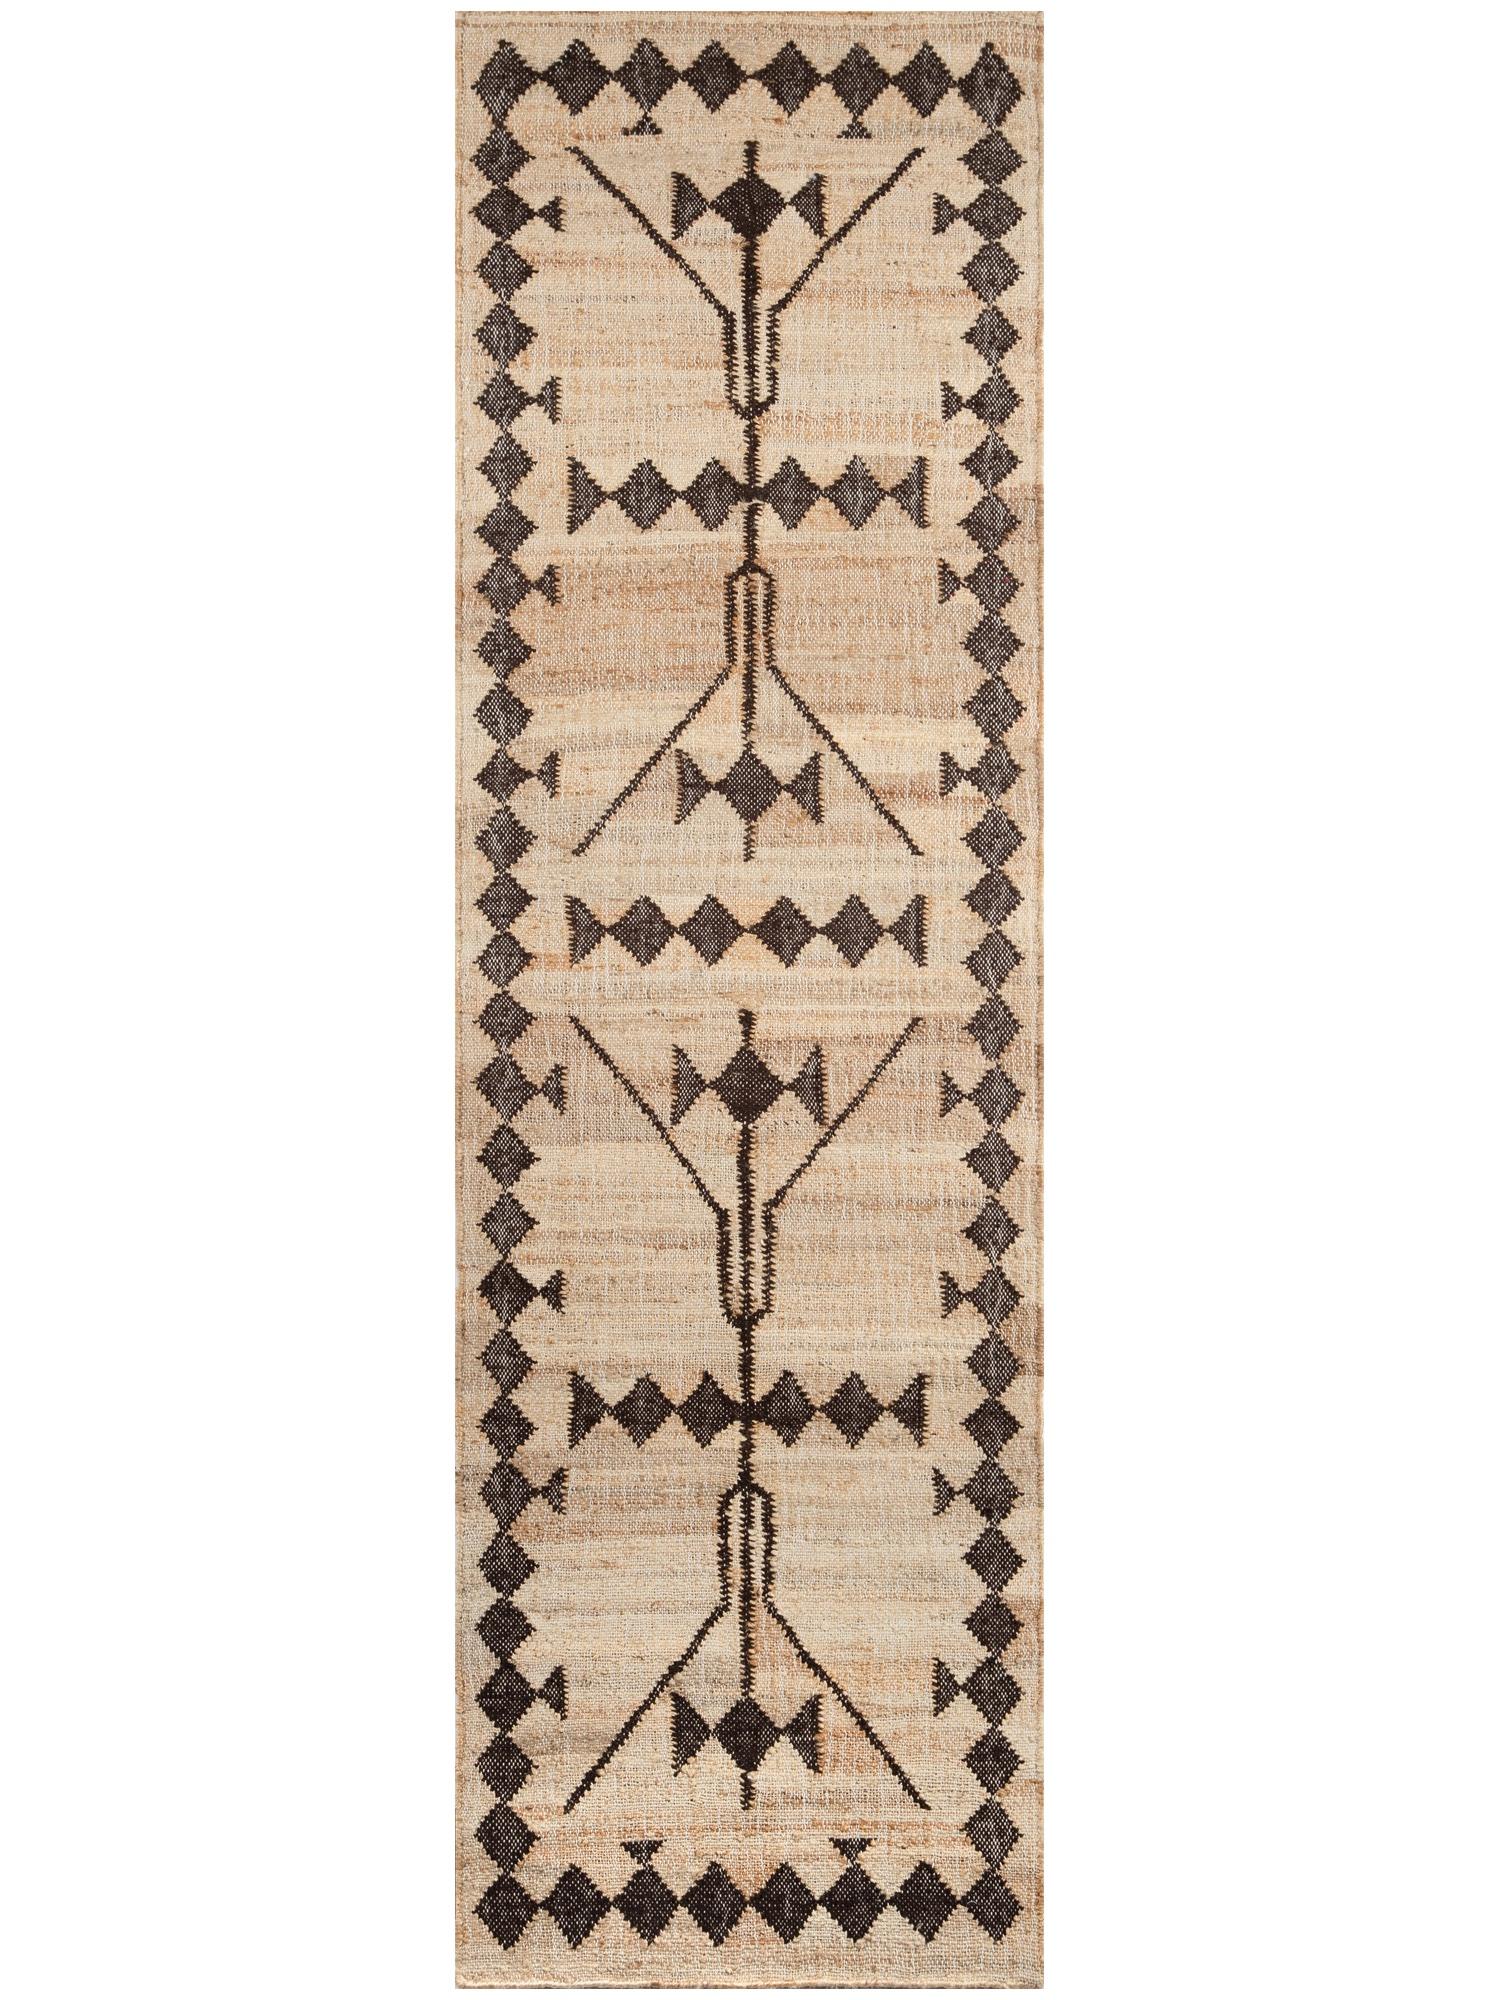 “Gurara Adrar” Modern Art-Inspired Rug by Christiane Lemieux In New Condition For Sale In New York, NY